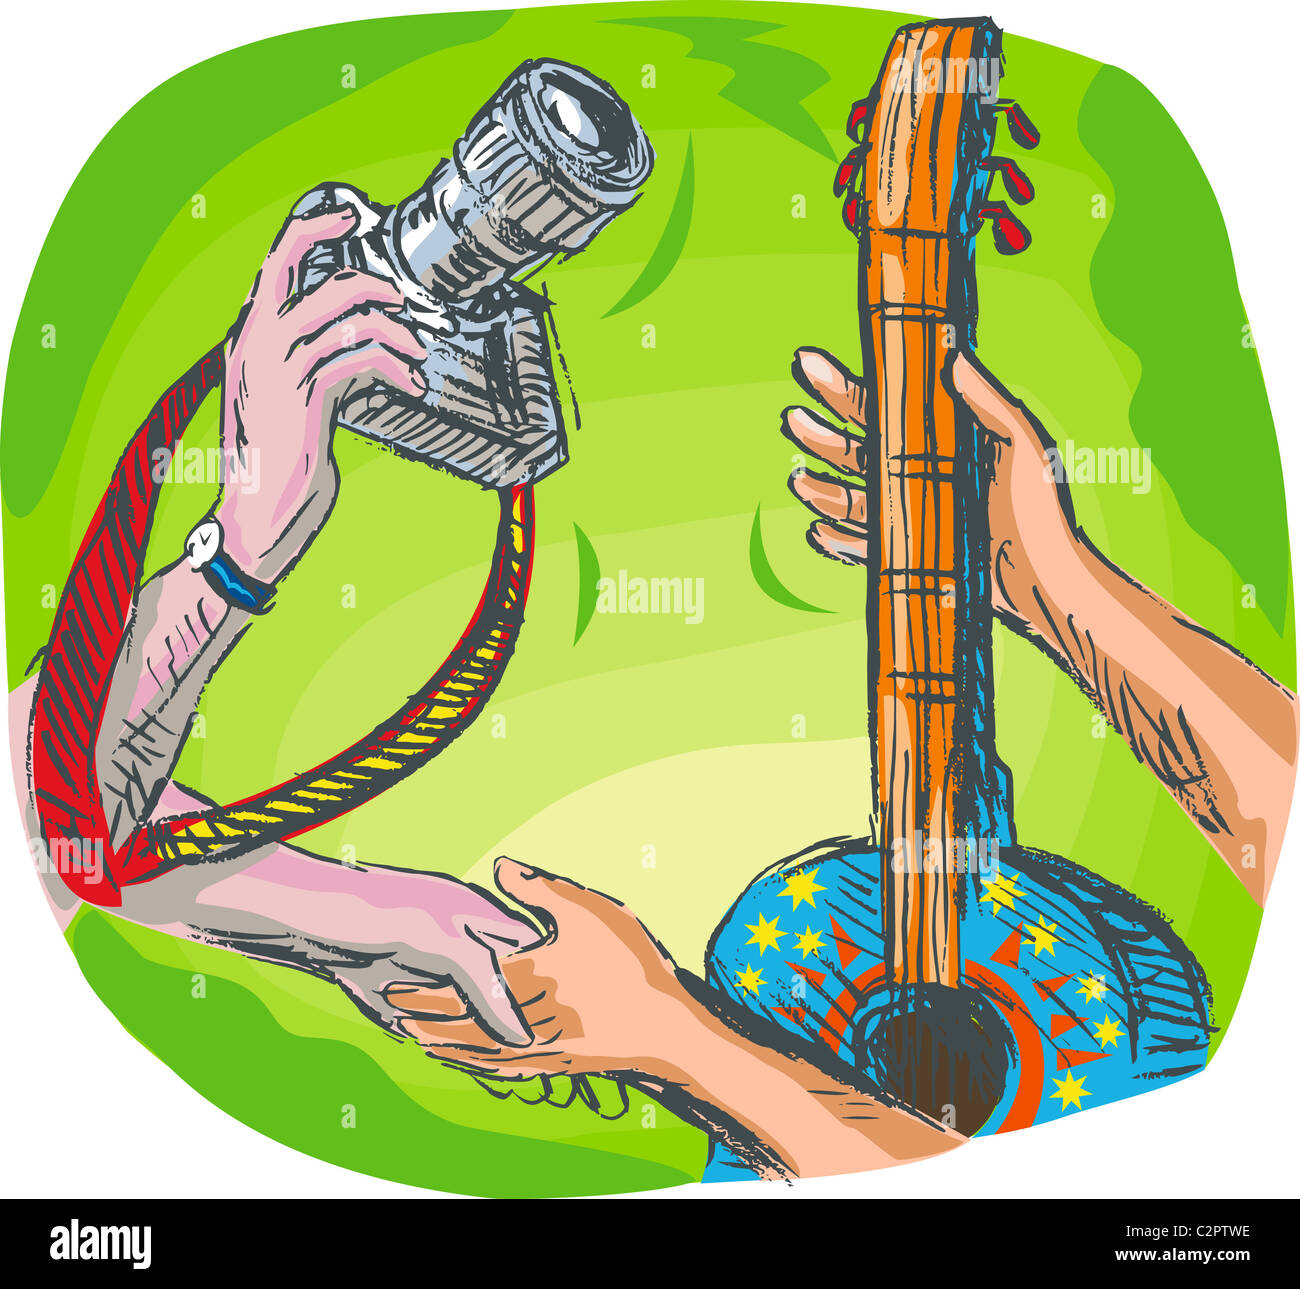 full color hand sketched drawing illustration showing two hands swapping DSLR camera or photography shoot with guitar or Stock Photo